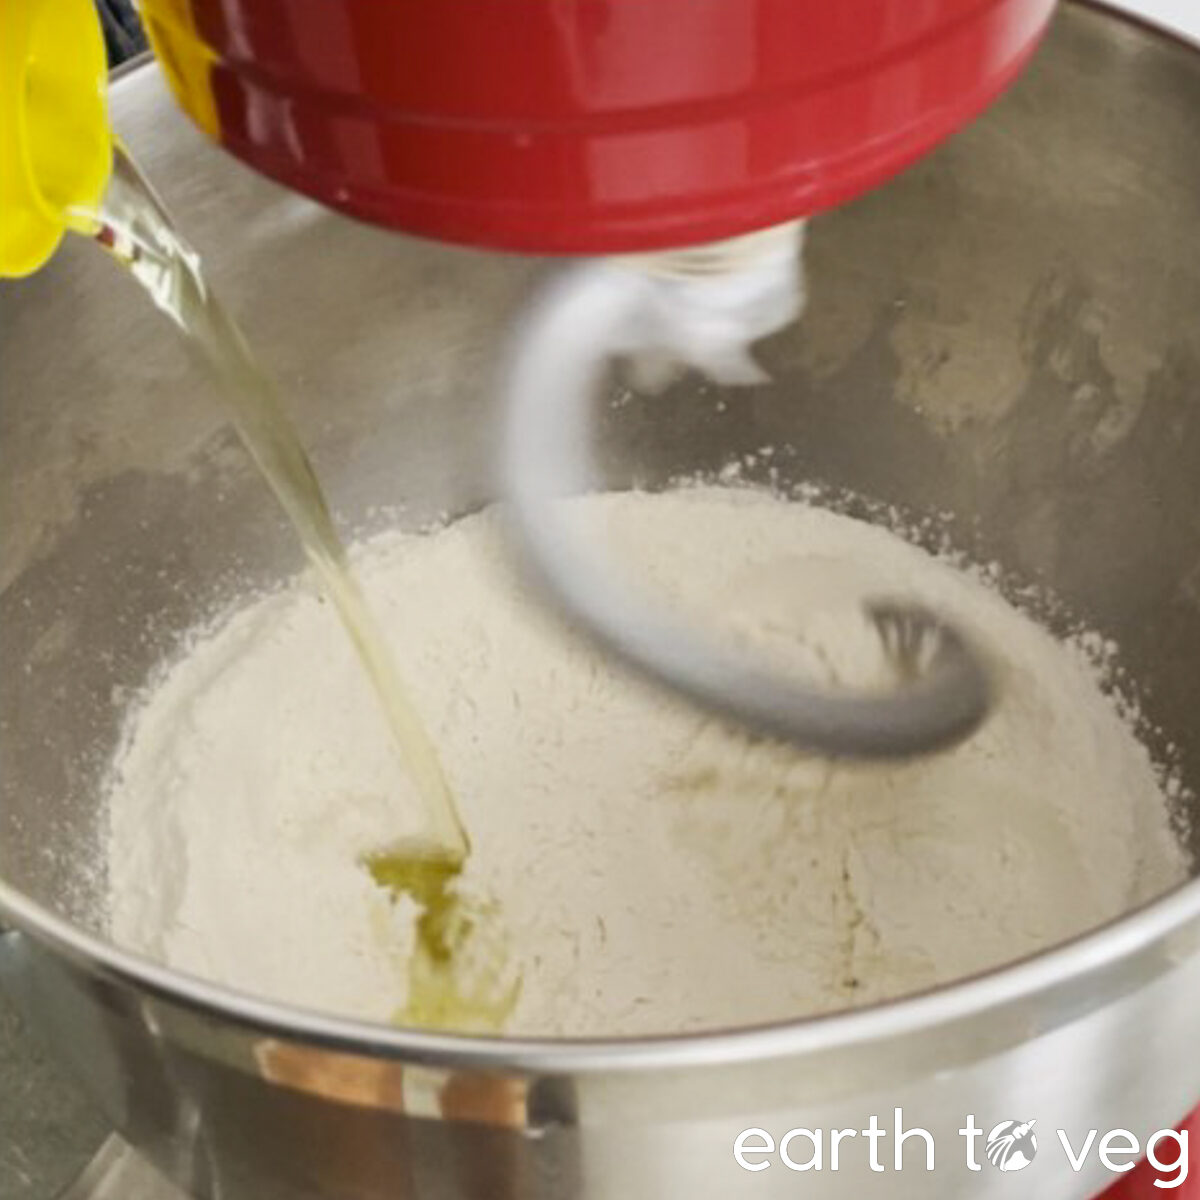 Grapeseed oil is poured onto flour in the mixing bowl.